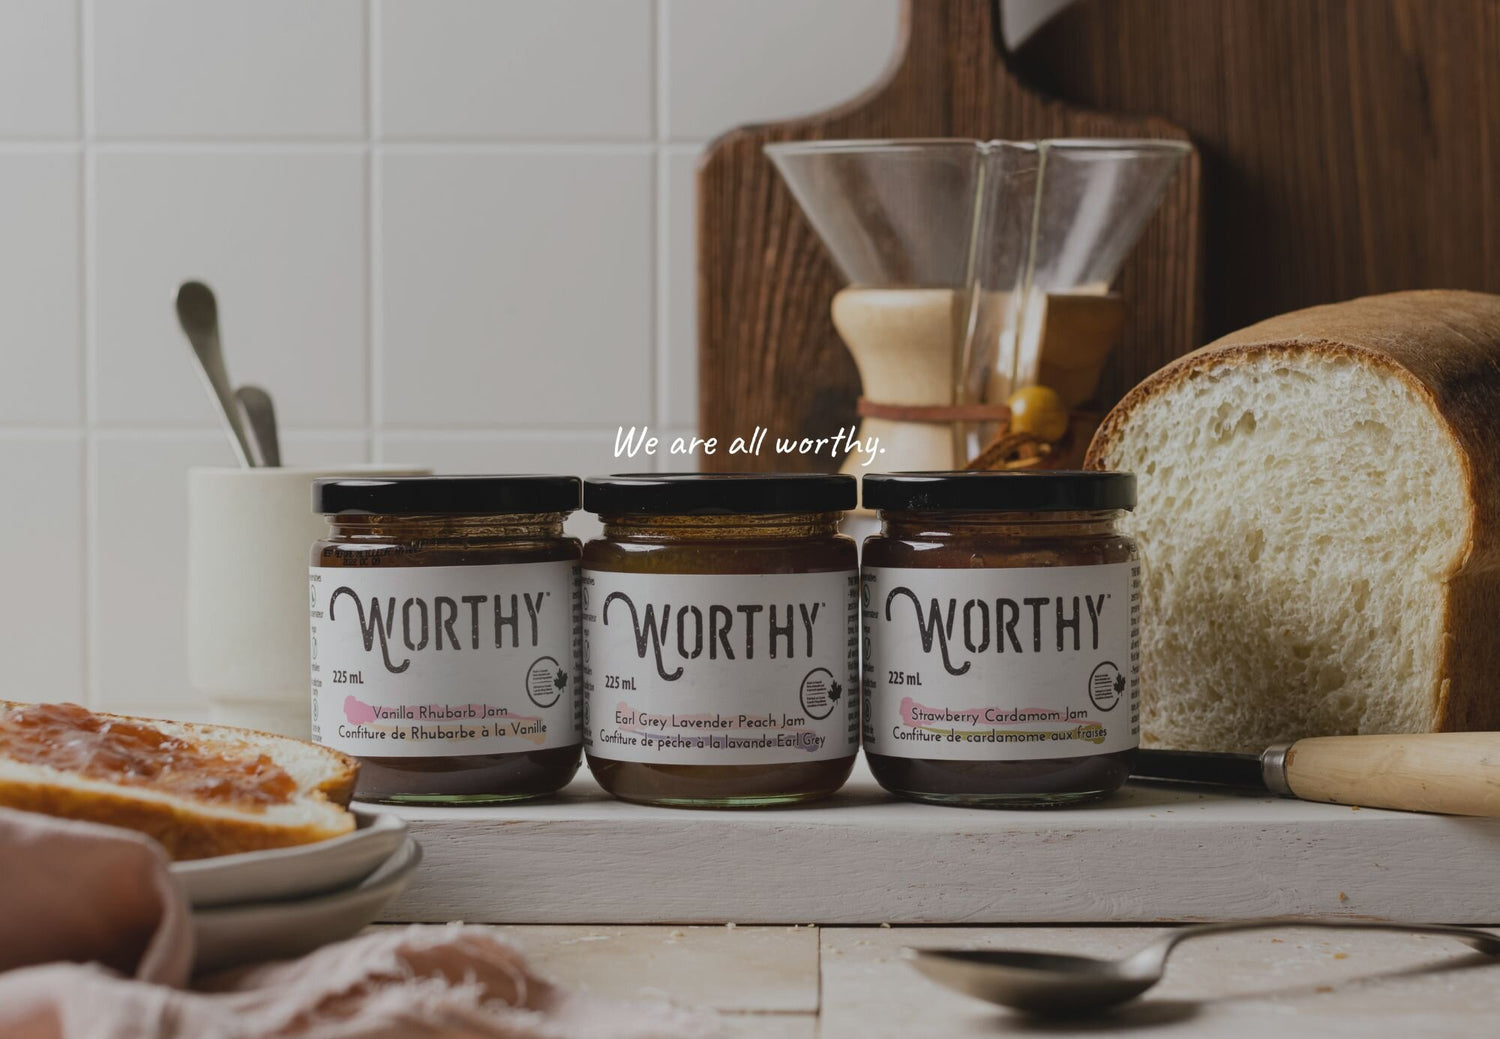 Three jars of Worthy jam on a cutting board in a kitchen setting with a quote that says "we are all worthy"